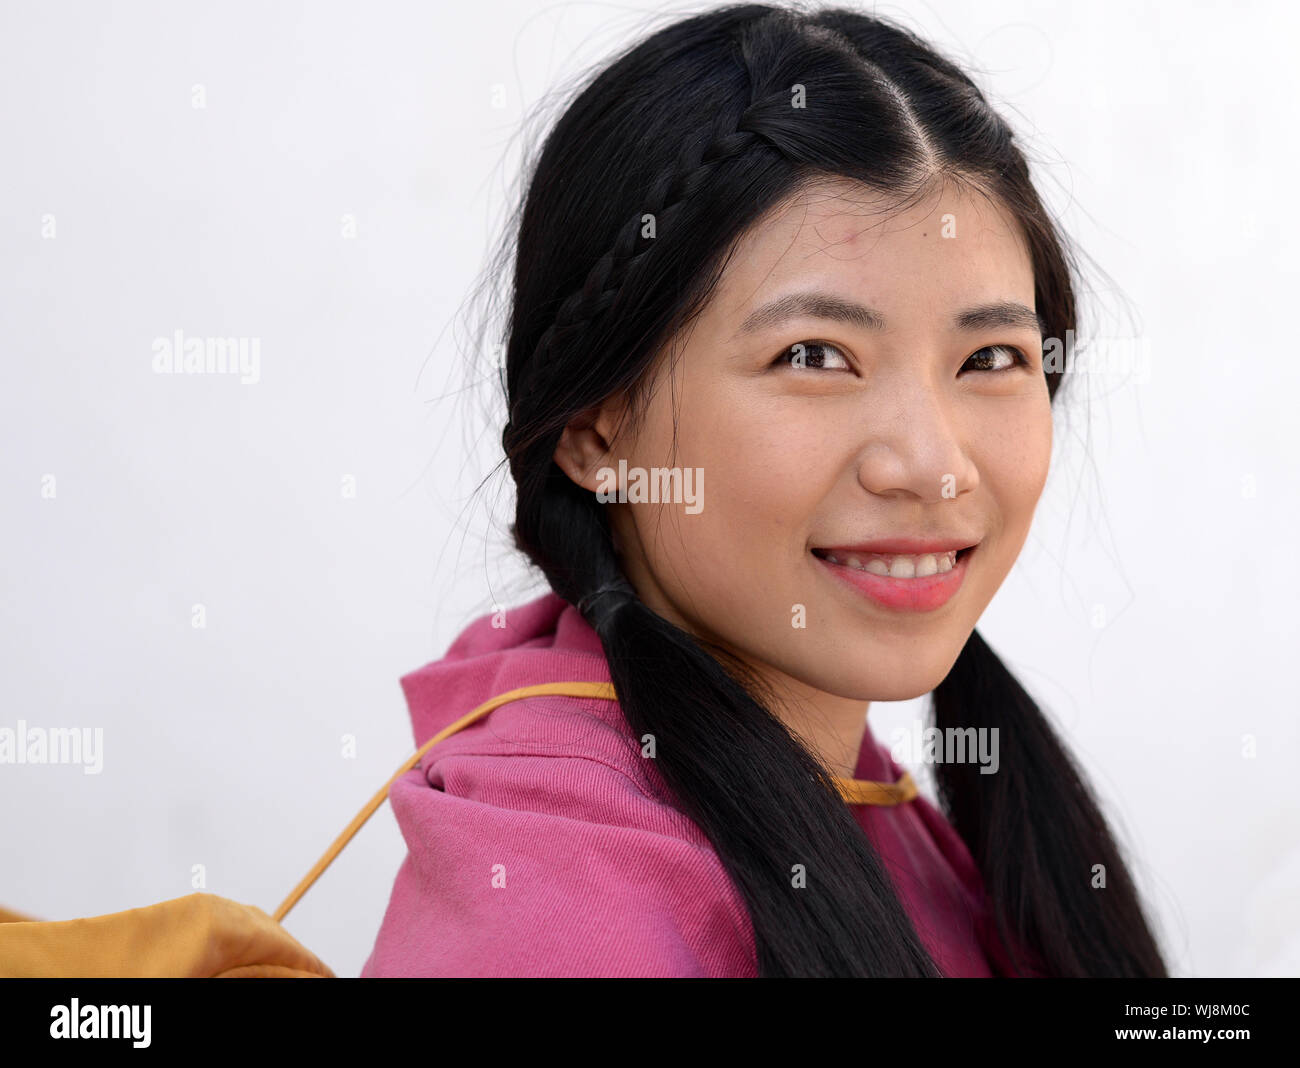 Pretty Thai girl with long pigtails poses for the camera. Stock Photo